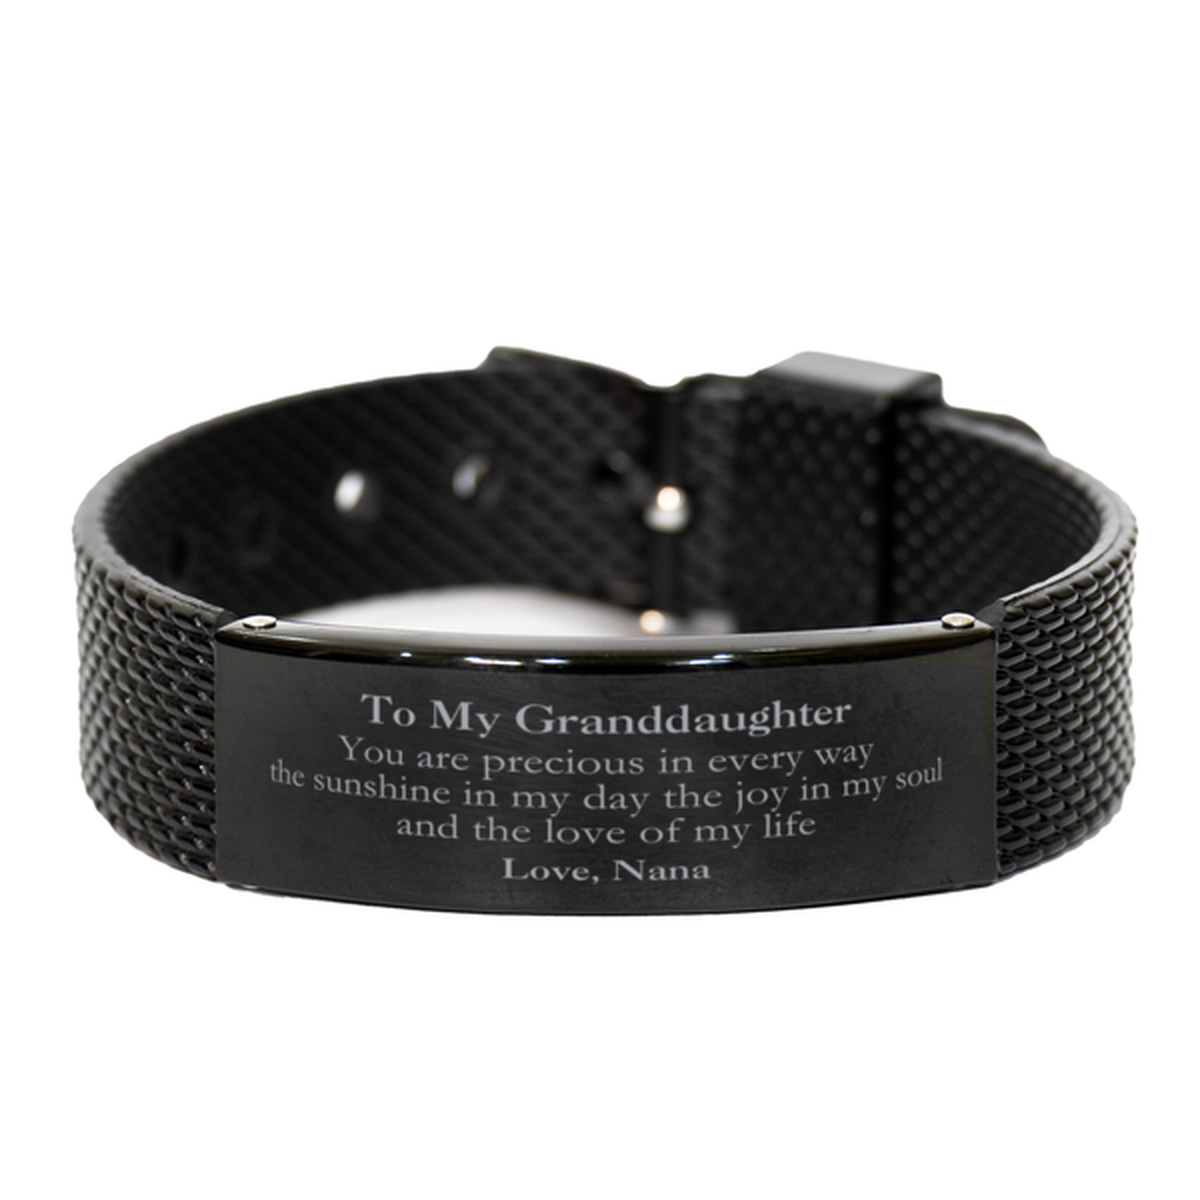 Graduation Gifts for Granddaughter Black Shark Mesh Bracelet Present from Nana, Christmas Granddaughter Birthday Gifts Granddaughter You are precious in every way the sunshine in my day. Love, Nana